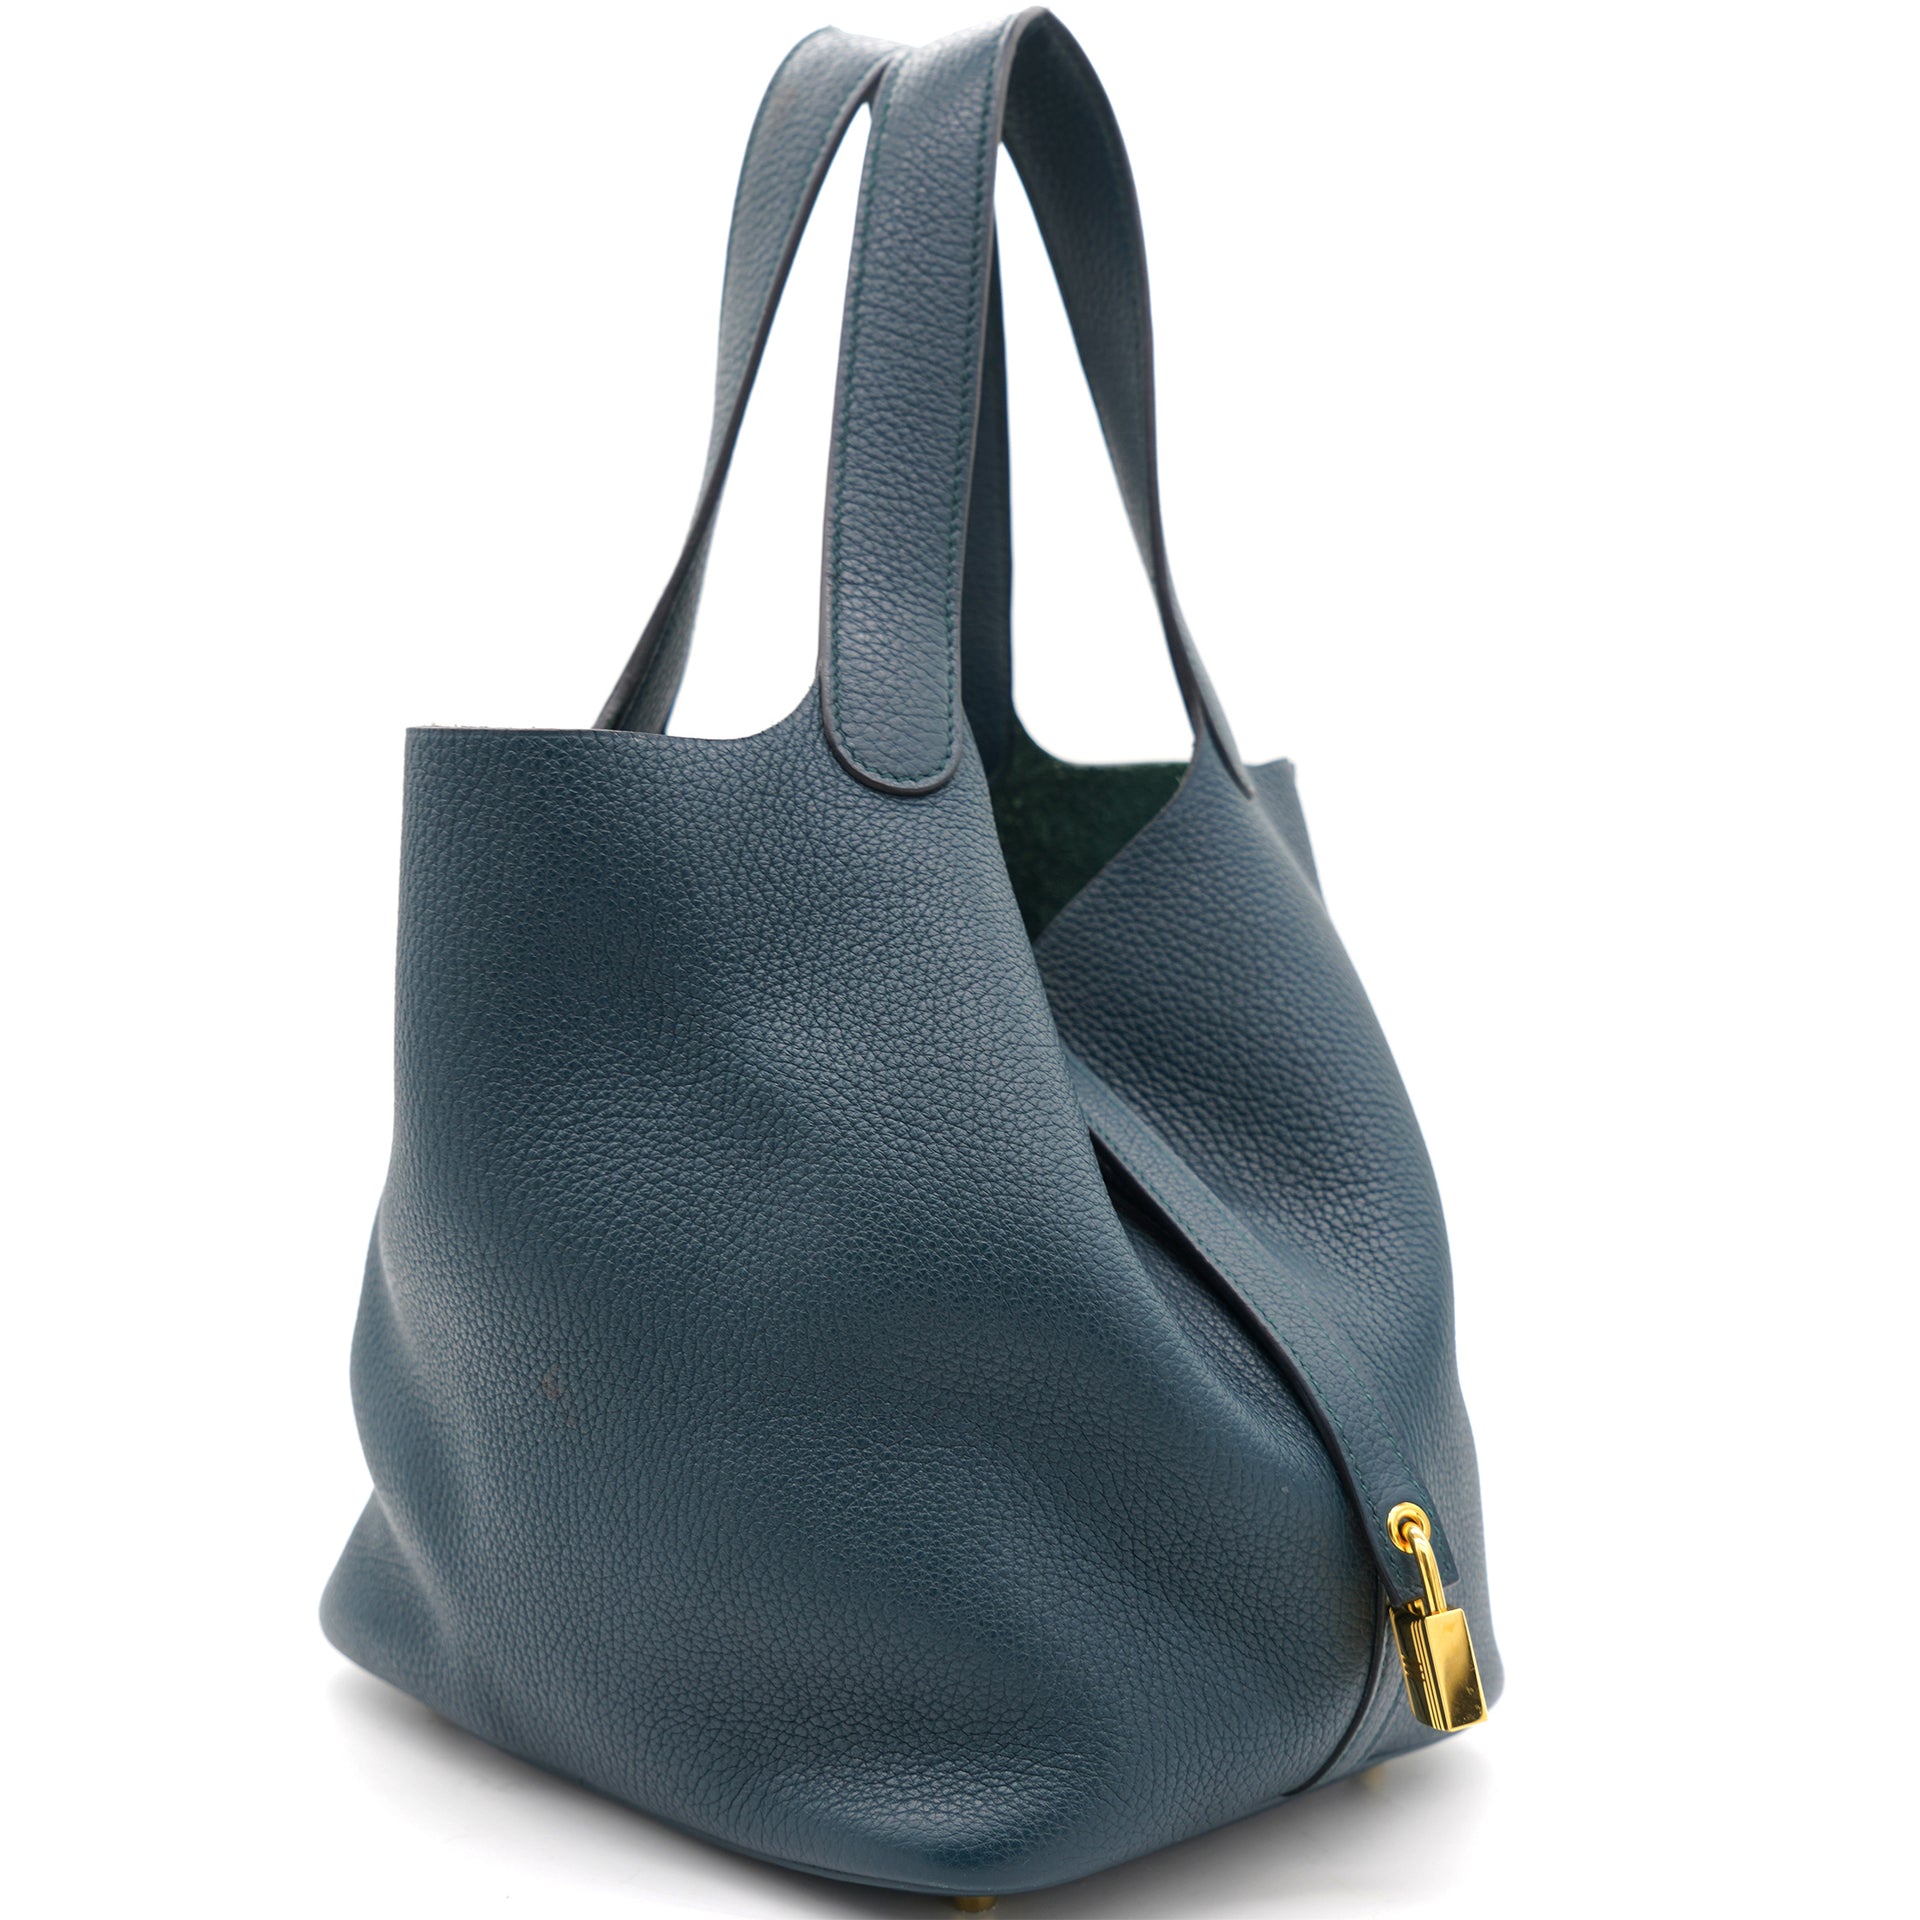 Picotin Lock 18 Tote in Vert Cypress, Blue Nuit and Black Clemence